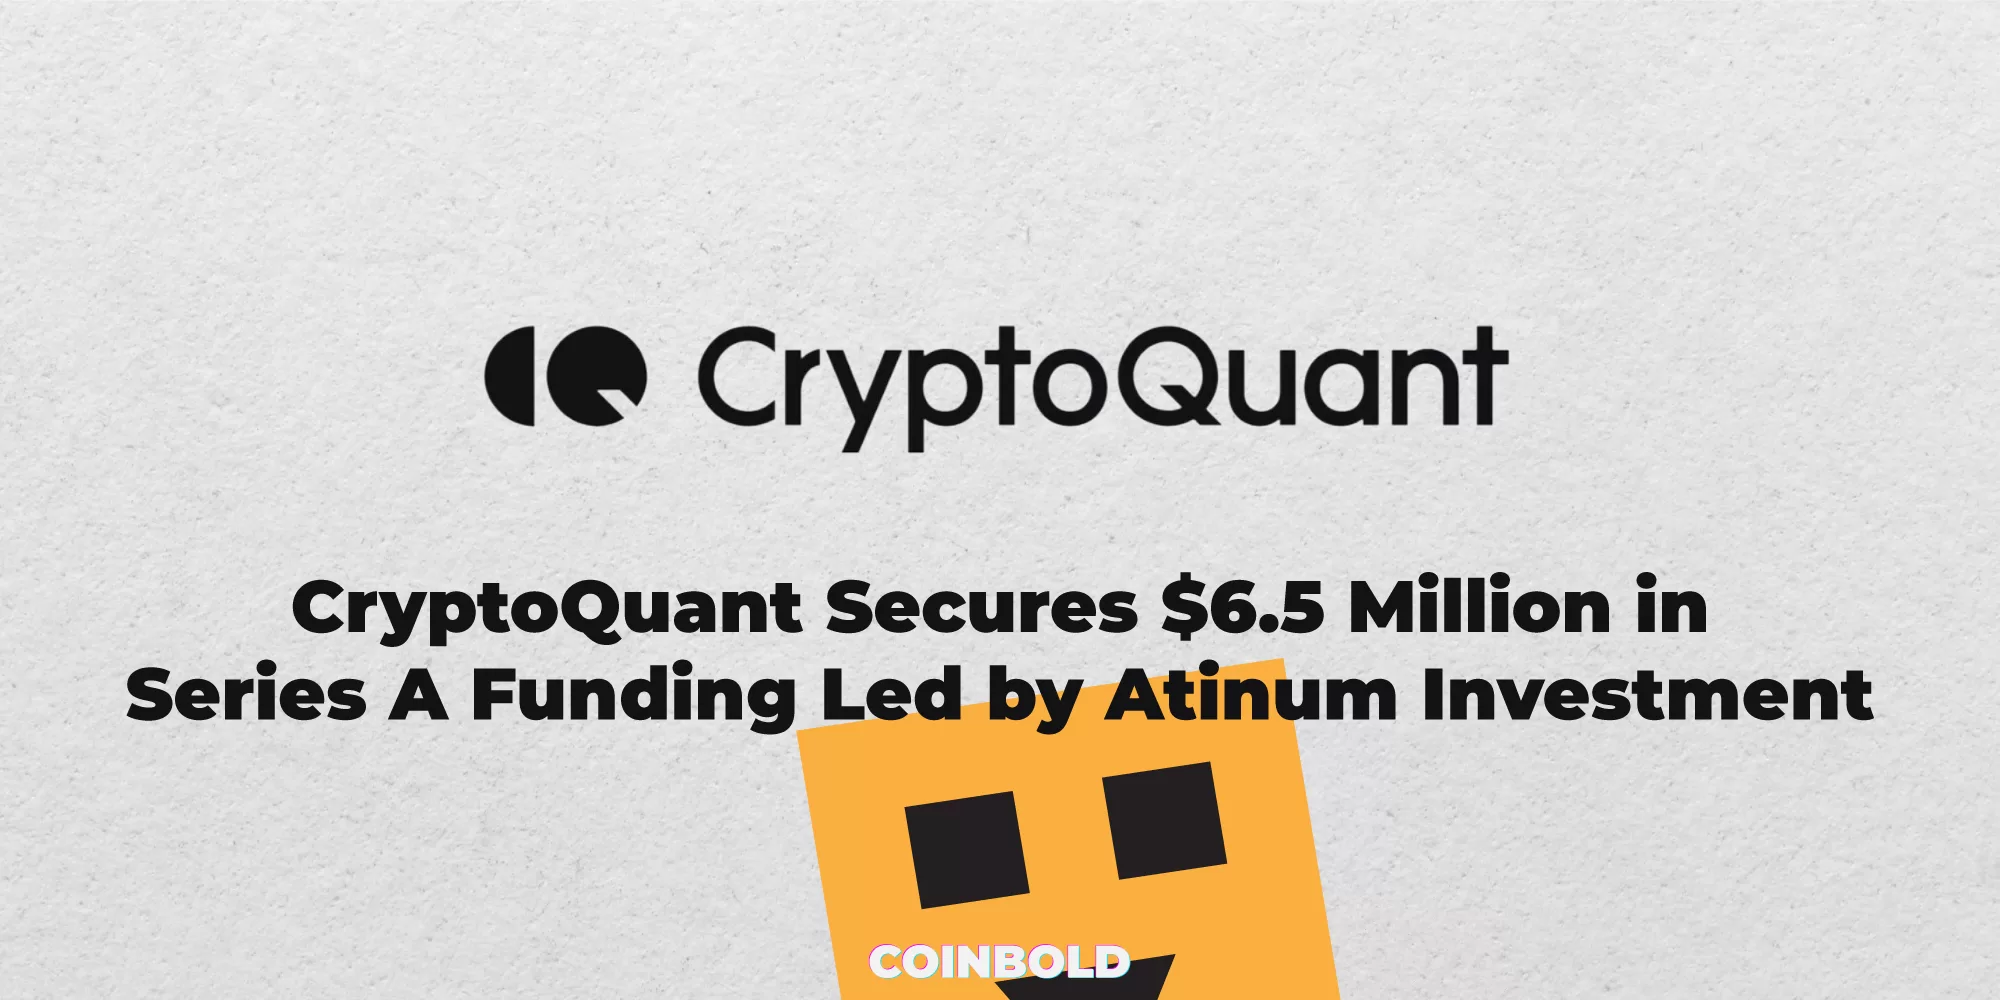 CryptoQuant Secures $6.5 Million in Series A Funding Led by Atinum Investment